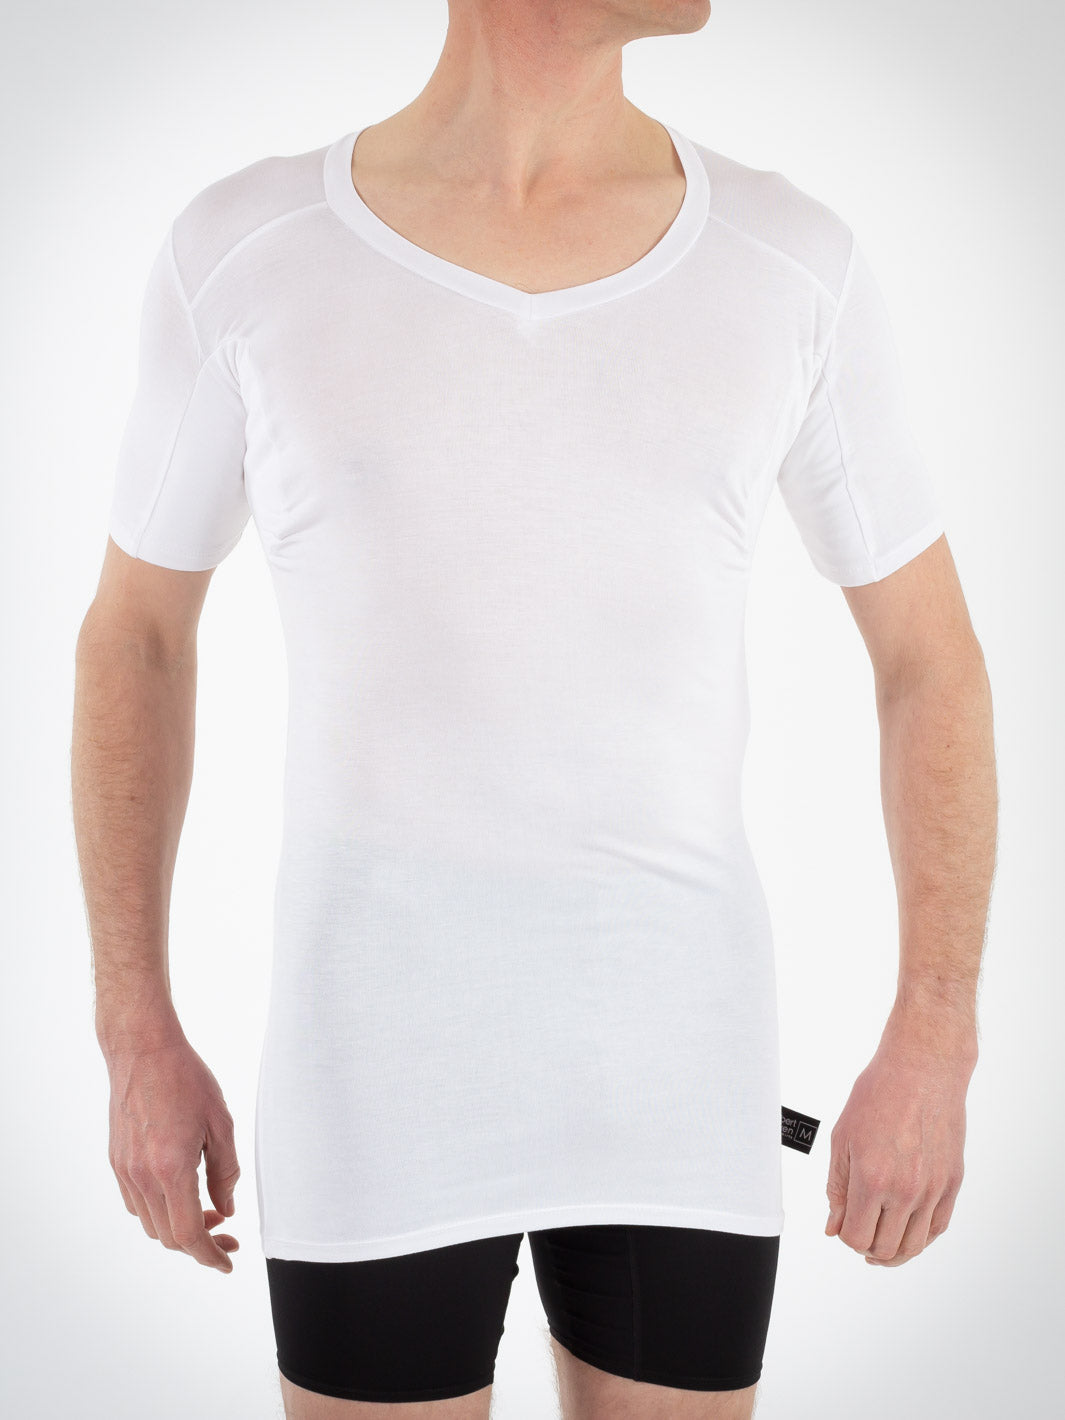 Picture of front of Sweat Protect Undershirt in white showing deep v neck